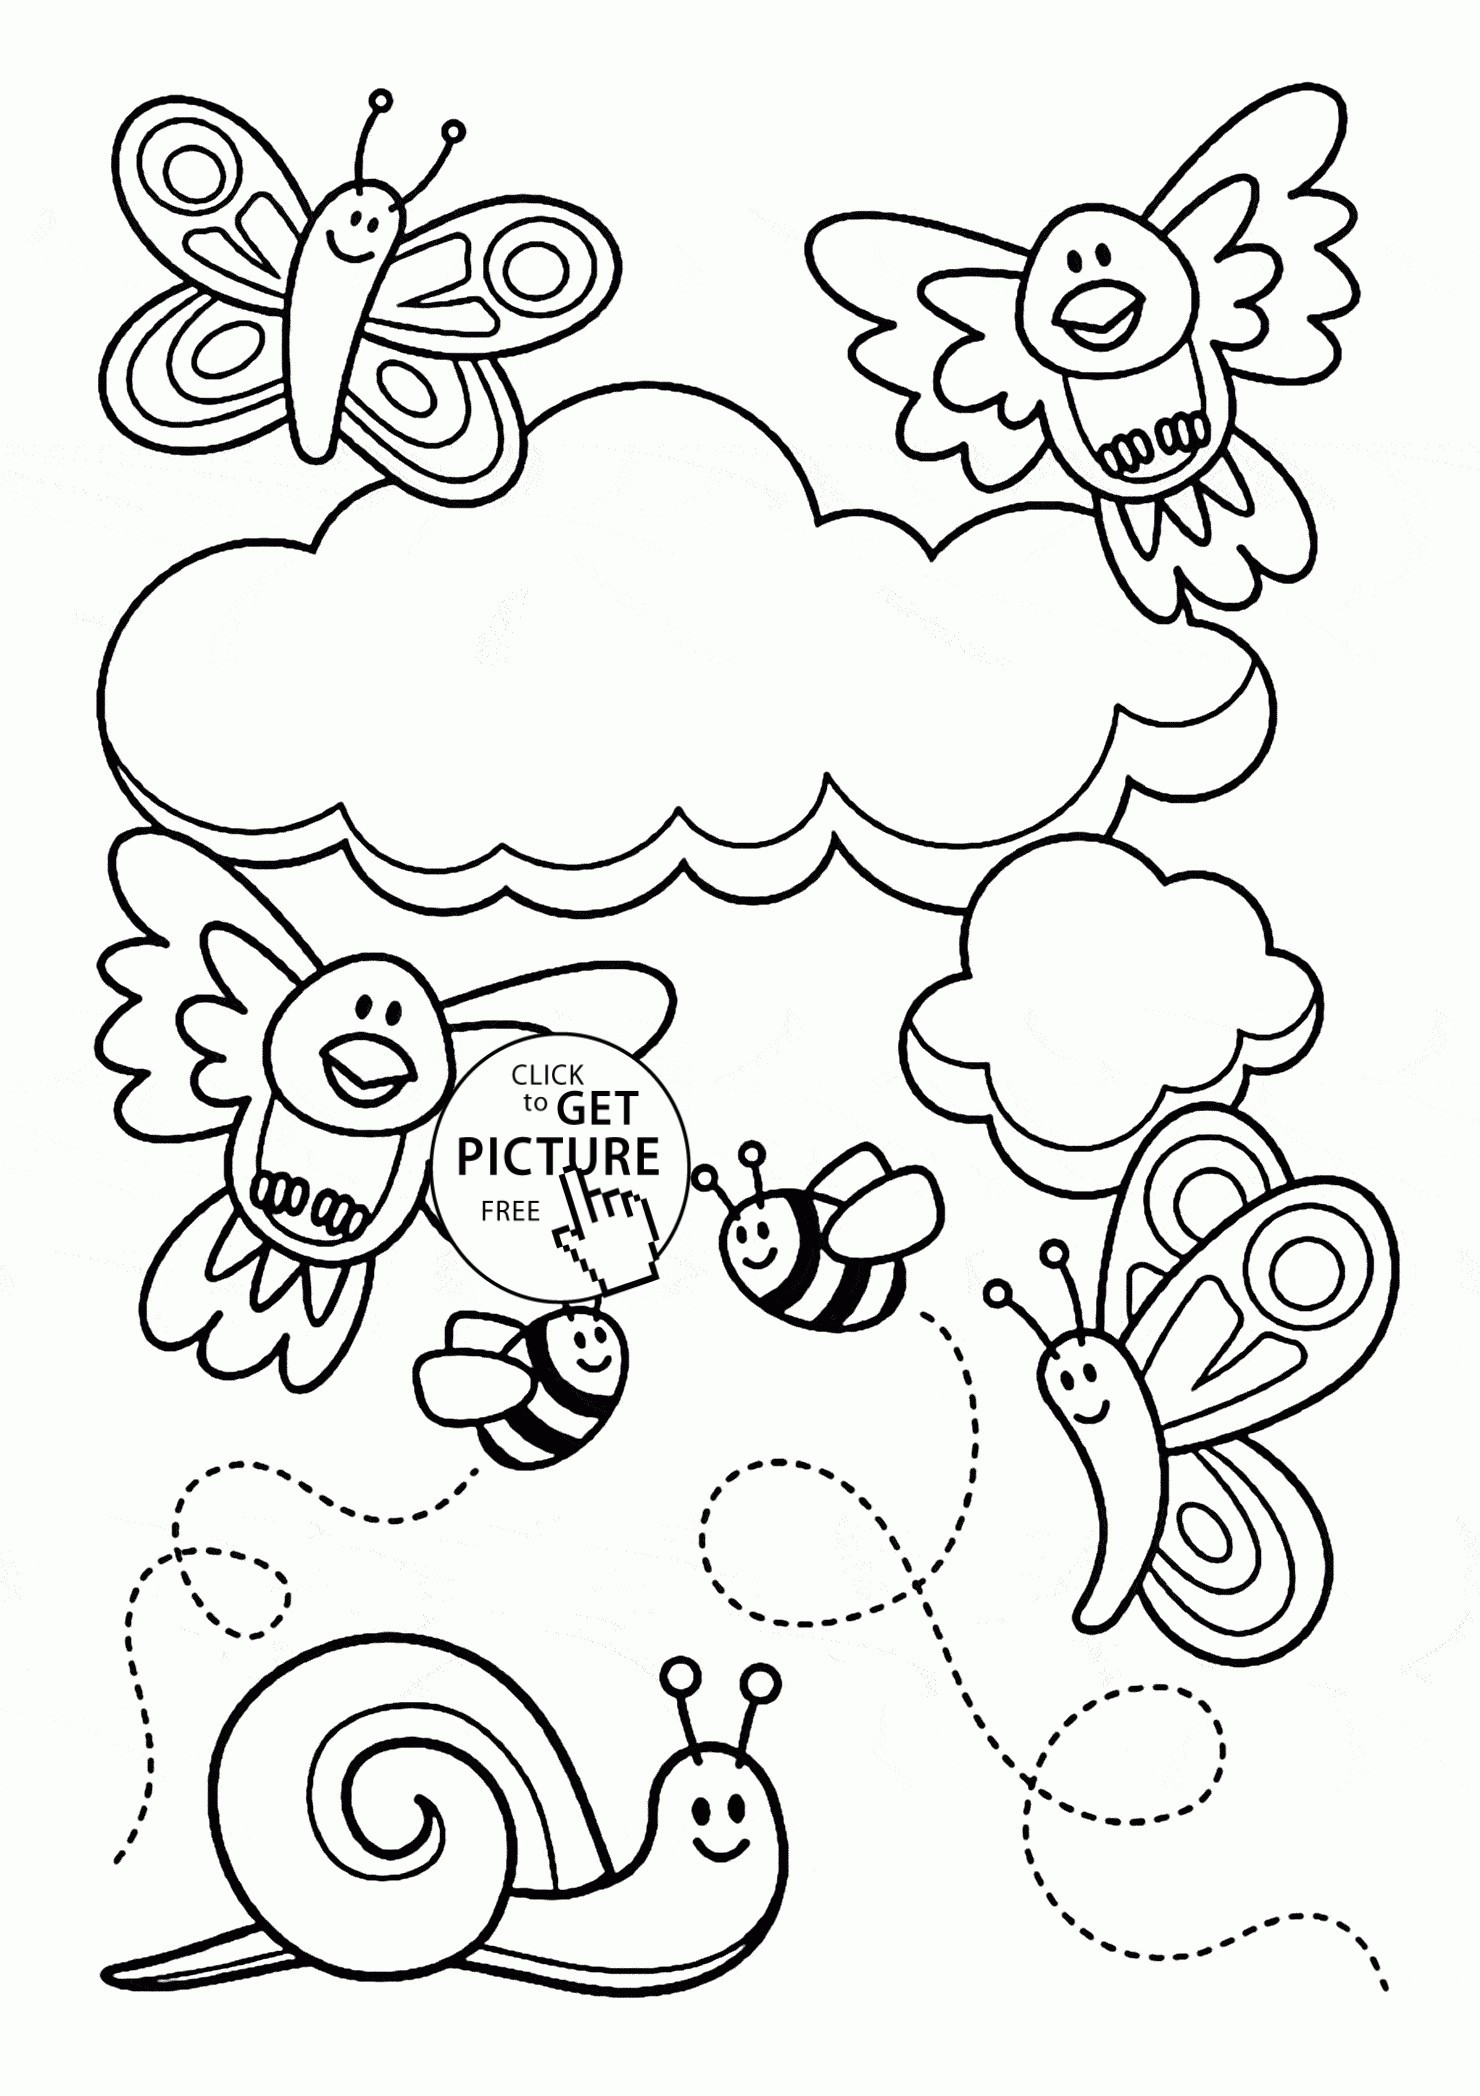 Free Printable Spring Coloring Pages
 Cute Spring Coloring Pages at GetColorings